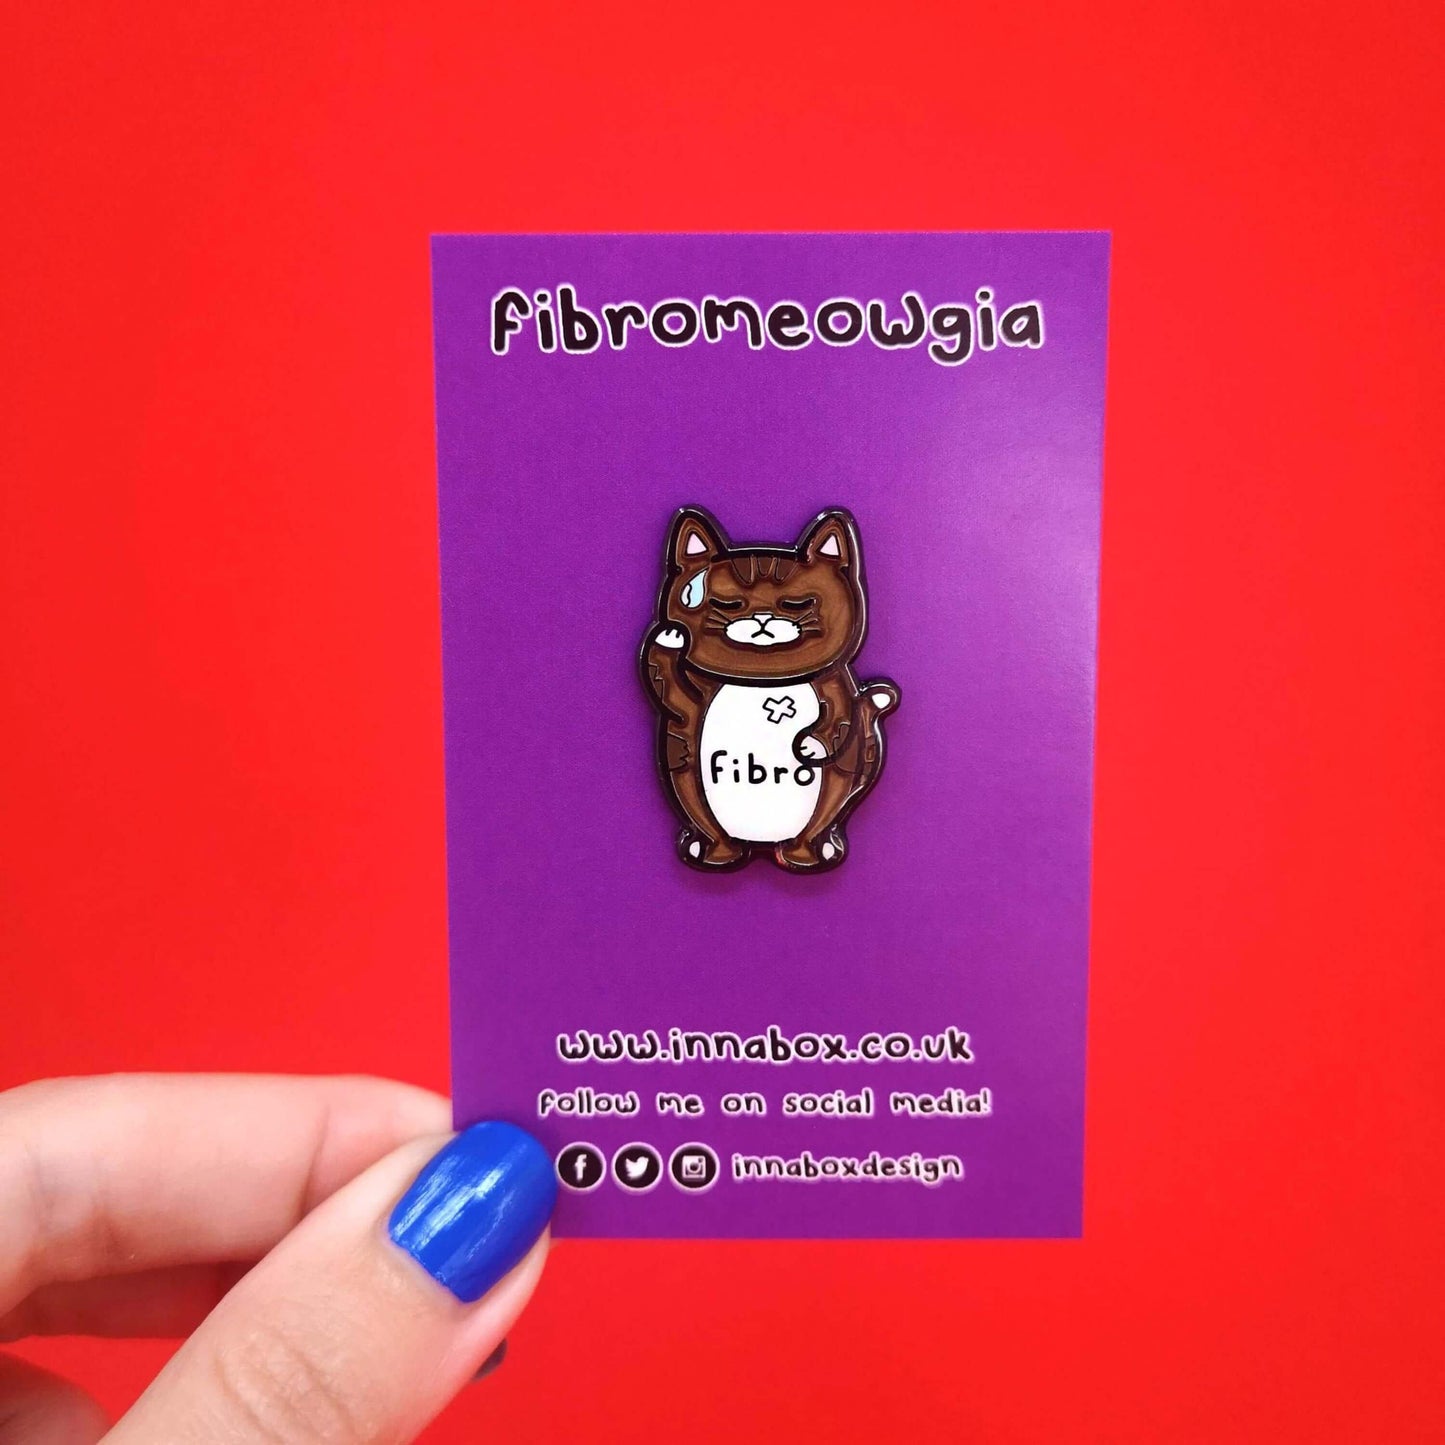 Fibromeowgia Enamel Pin - Fibromyalgia on purple backing card held in front of a red background. The enamel pin is a brown cat with a white stomach with fibro written across it. The cat has its eyes closed, a sweat droplet on its forehead and holding its head in its paw. The enamel pin is designed to raise awareness for fibromyalgia